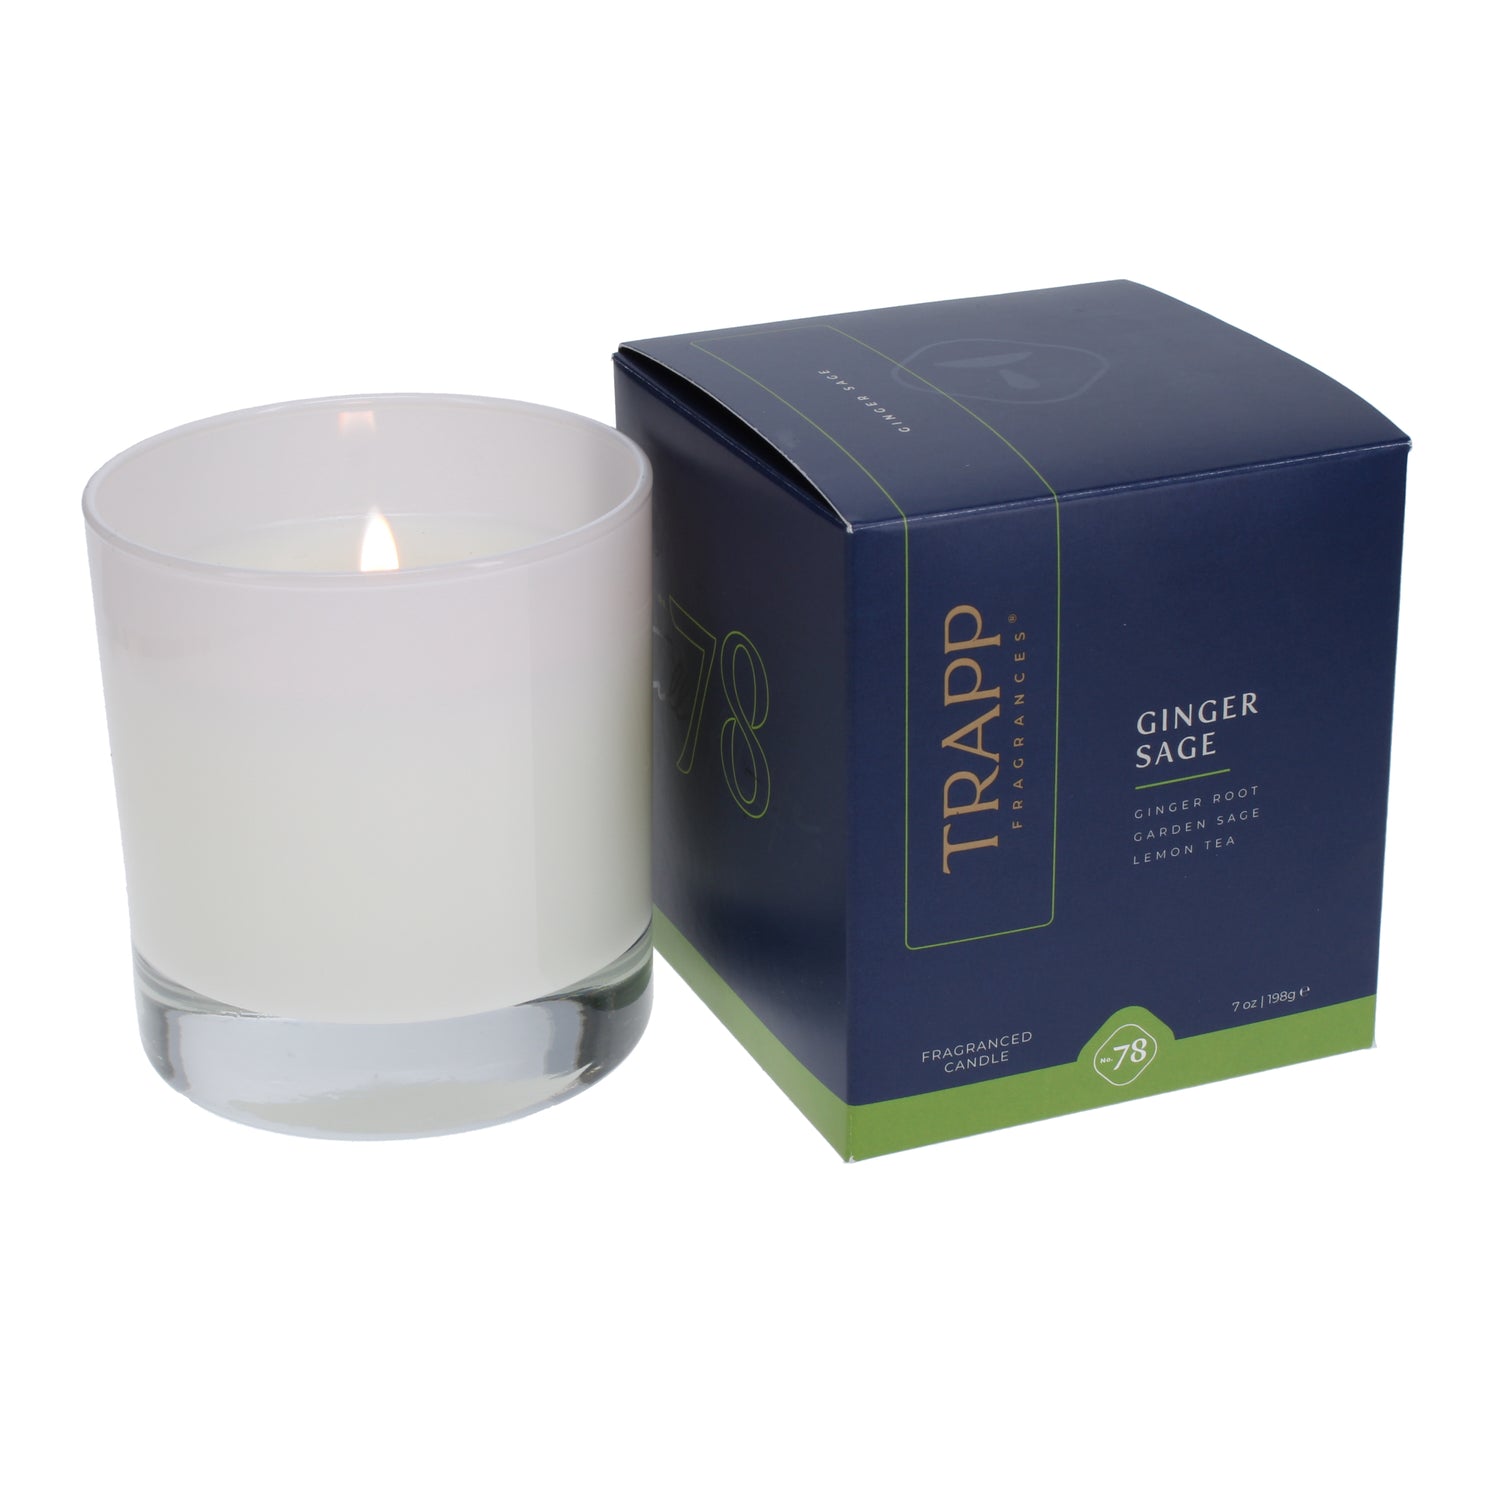 No. 78 Ginger Sage 7 oz. Candle in Signature Box Image 2